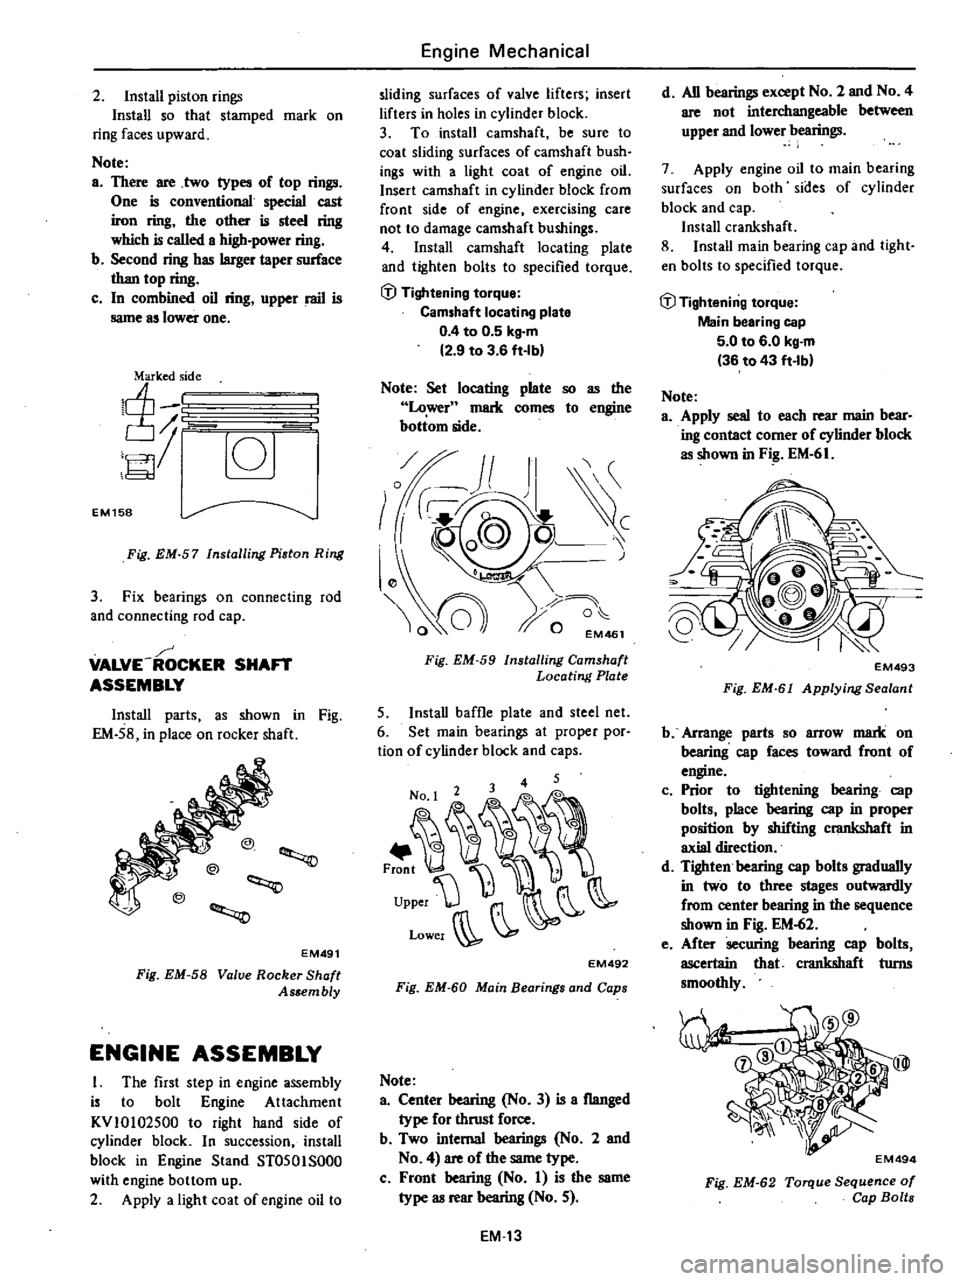 DATSUN 210 1979 Owners Manual 
2

Install

piston 
rings

Install 
so 
that

stamped 
mark 
on

ring 
faces

upward

Note

a 
There 
are 
two

types 
of

top 
rings

One 
is 
conventional

special 
cast

iron

ring 
the 
other 
is